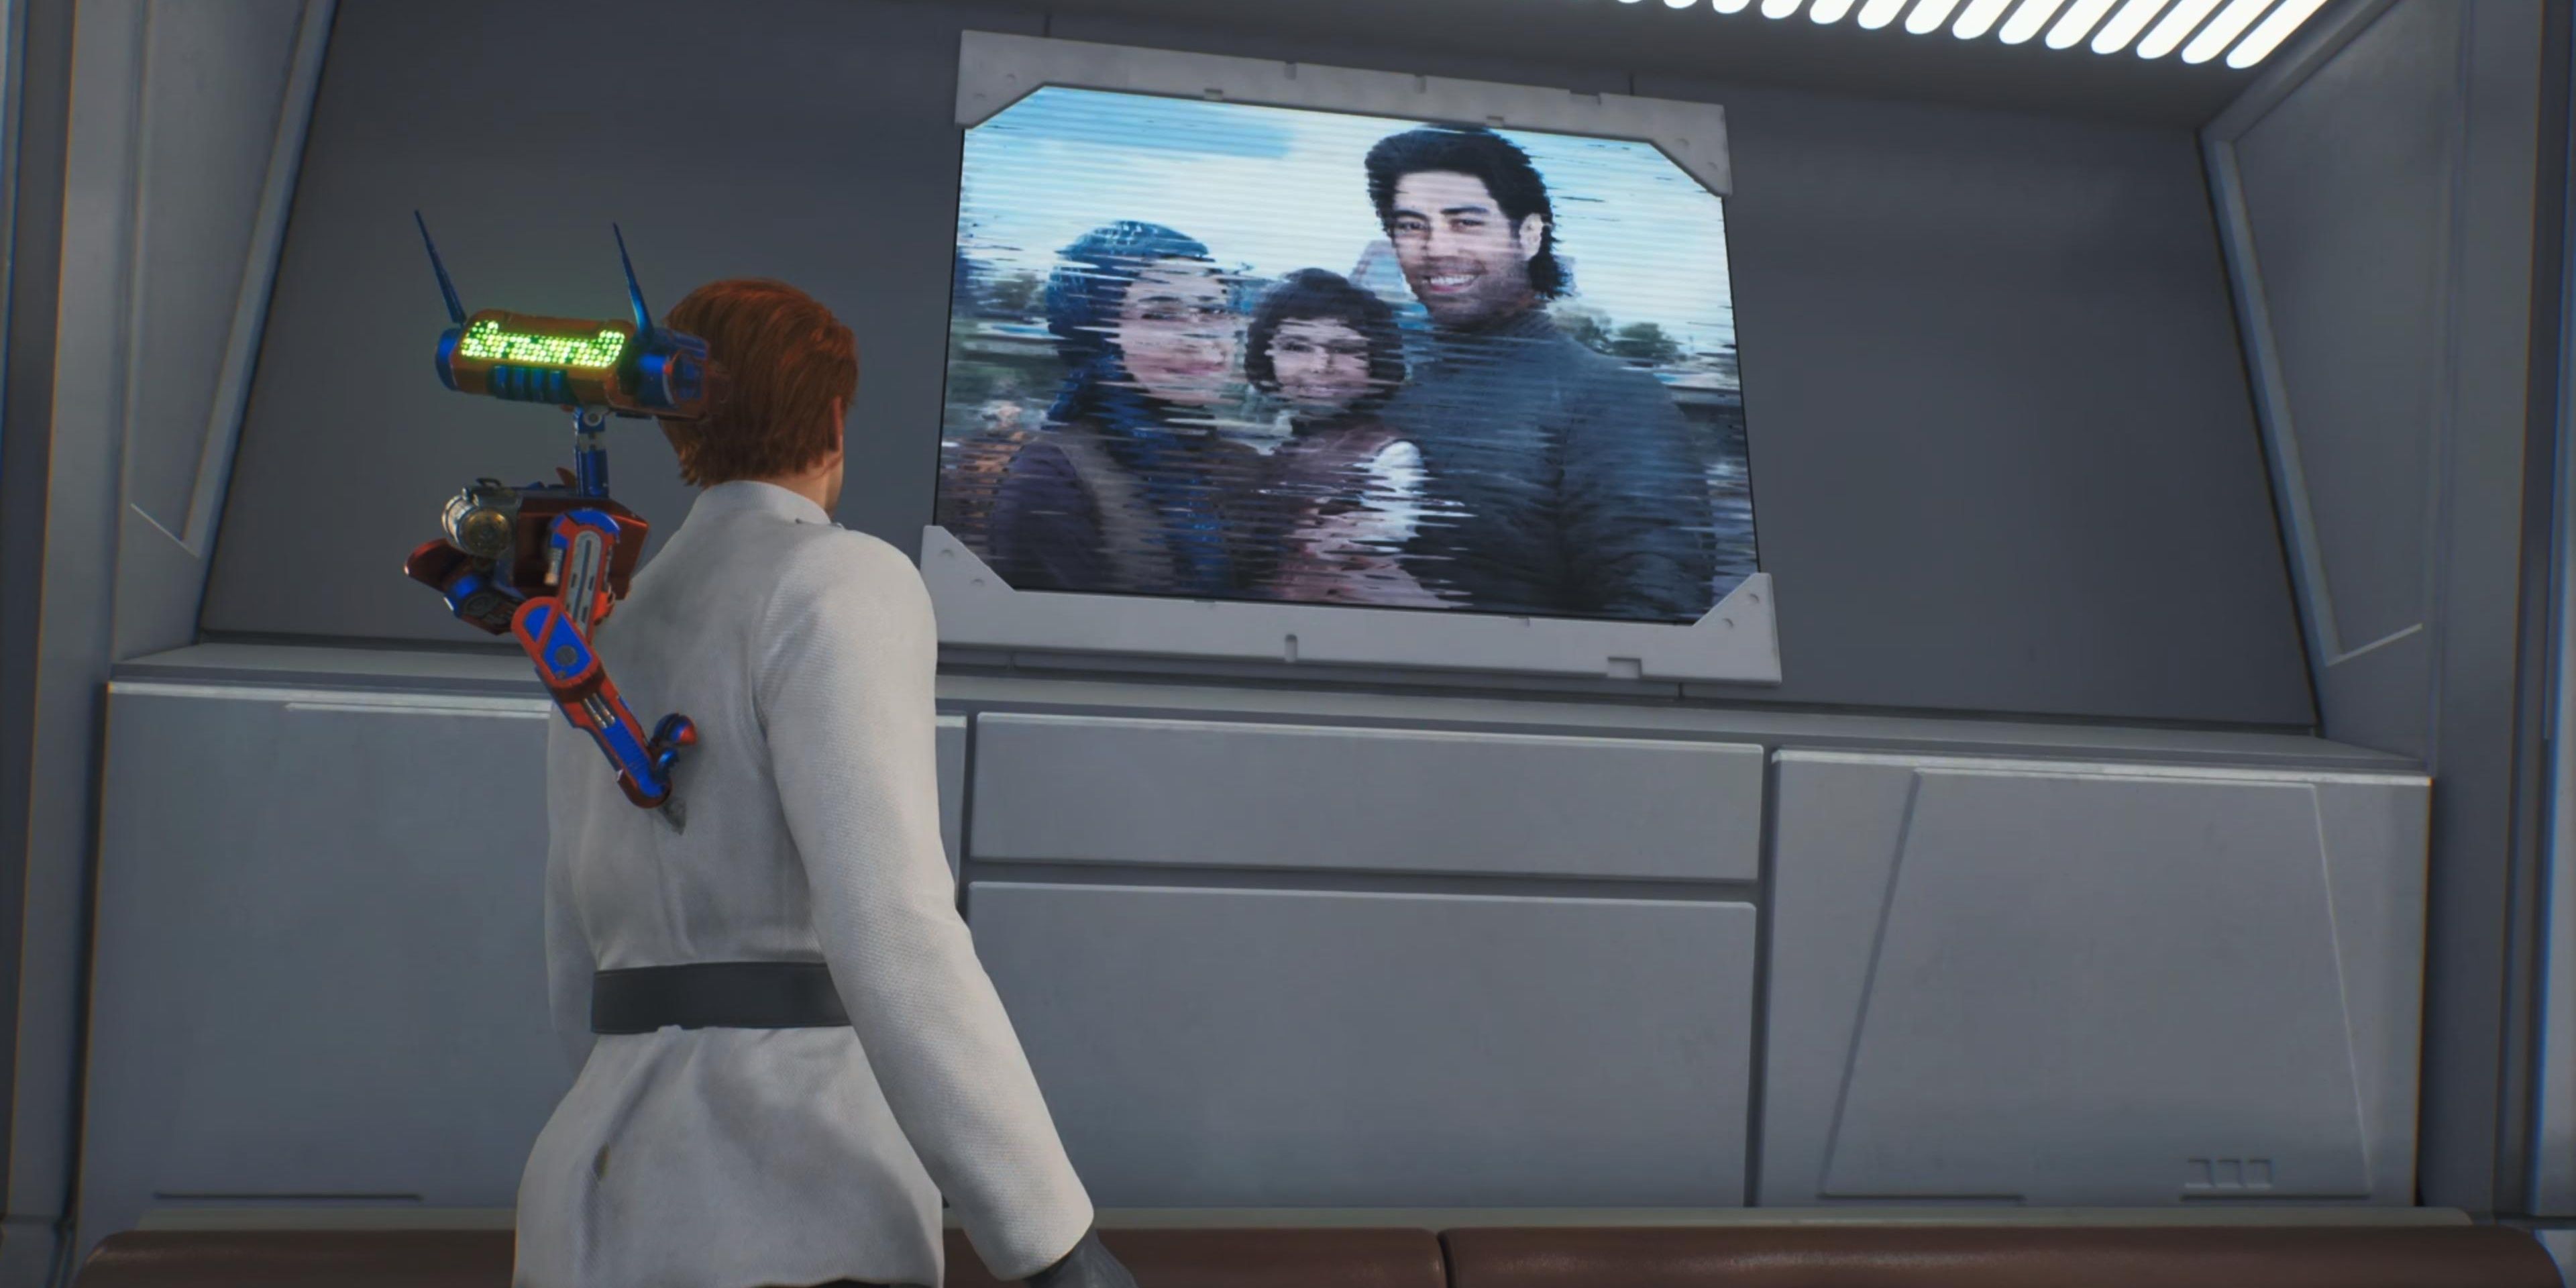 Cal looking at Bode's family photo In Star Wars Jedi: Survivor